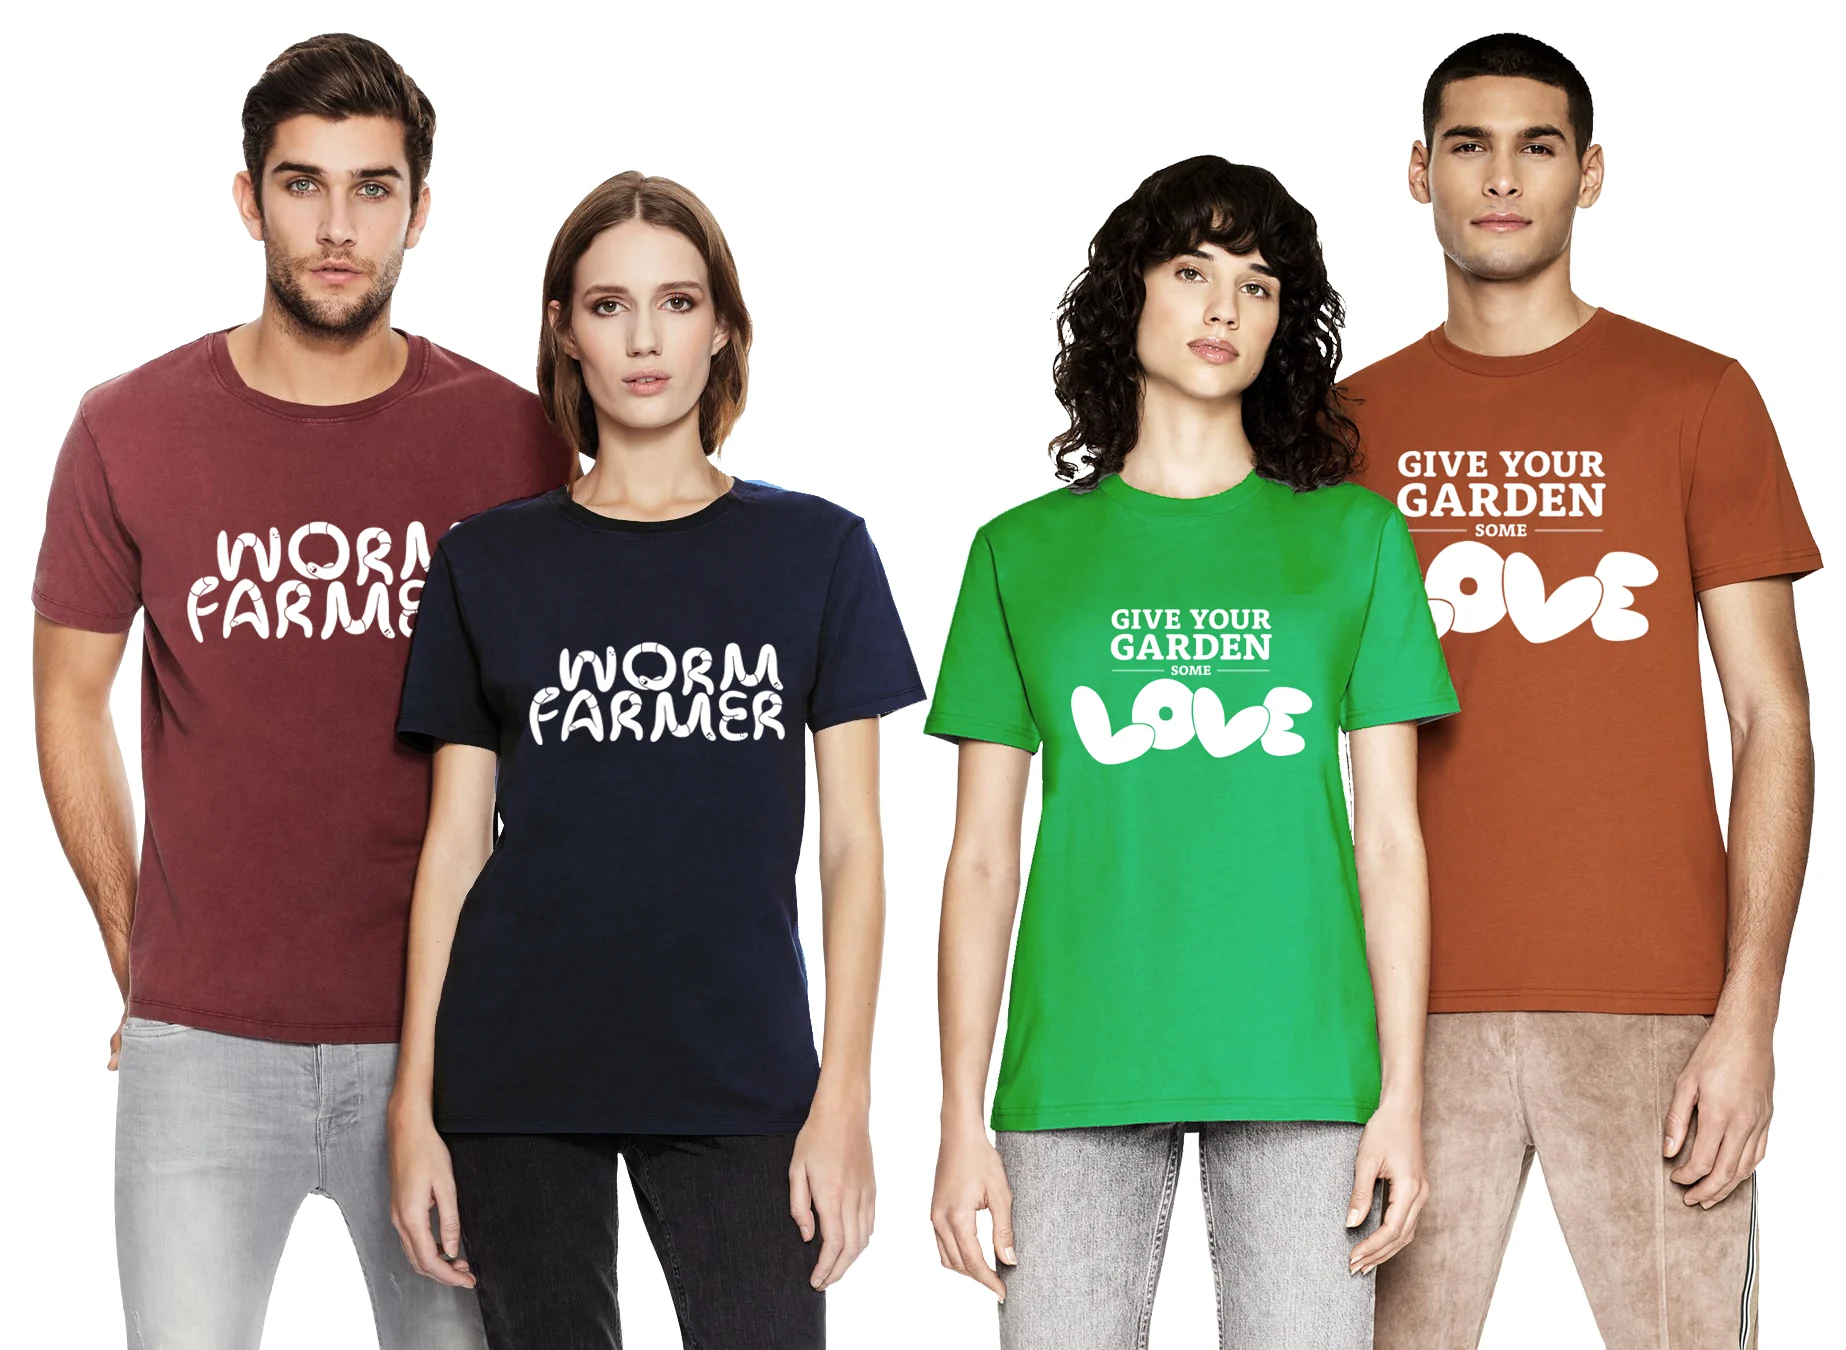 Models showing off the 'Worm Farmer' and 'Give your Garden some love' tshirts in burgundy, navy, green and dark orange.